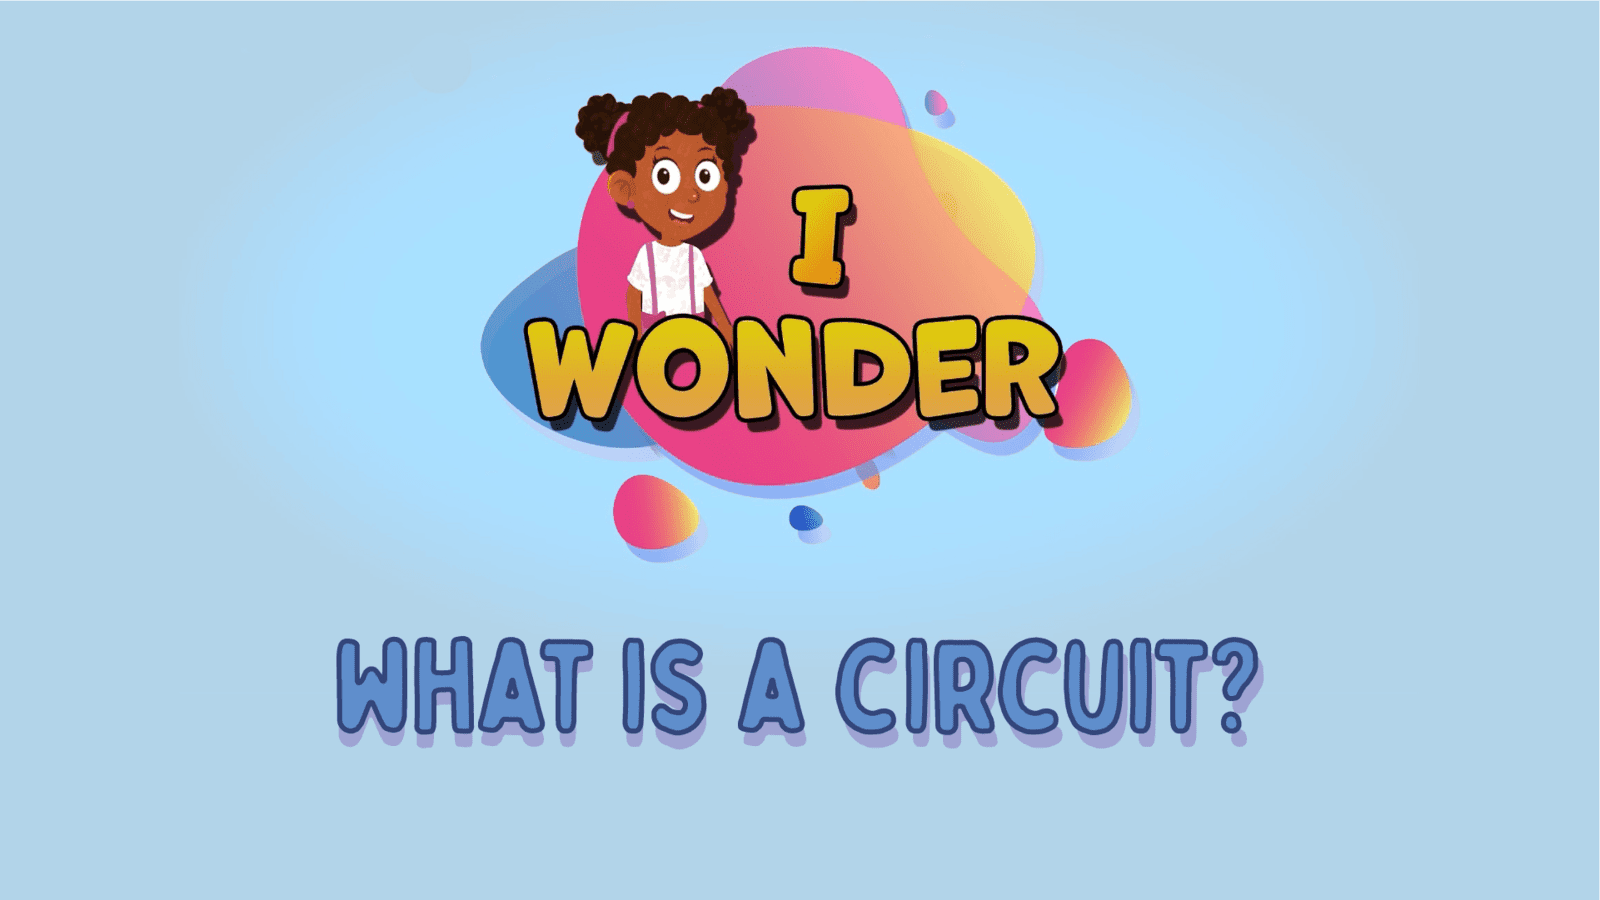 What Is A Circuit?